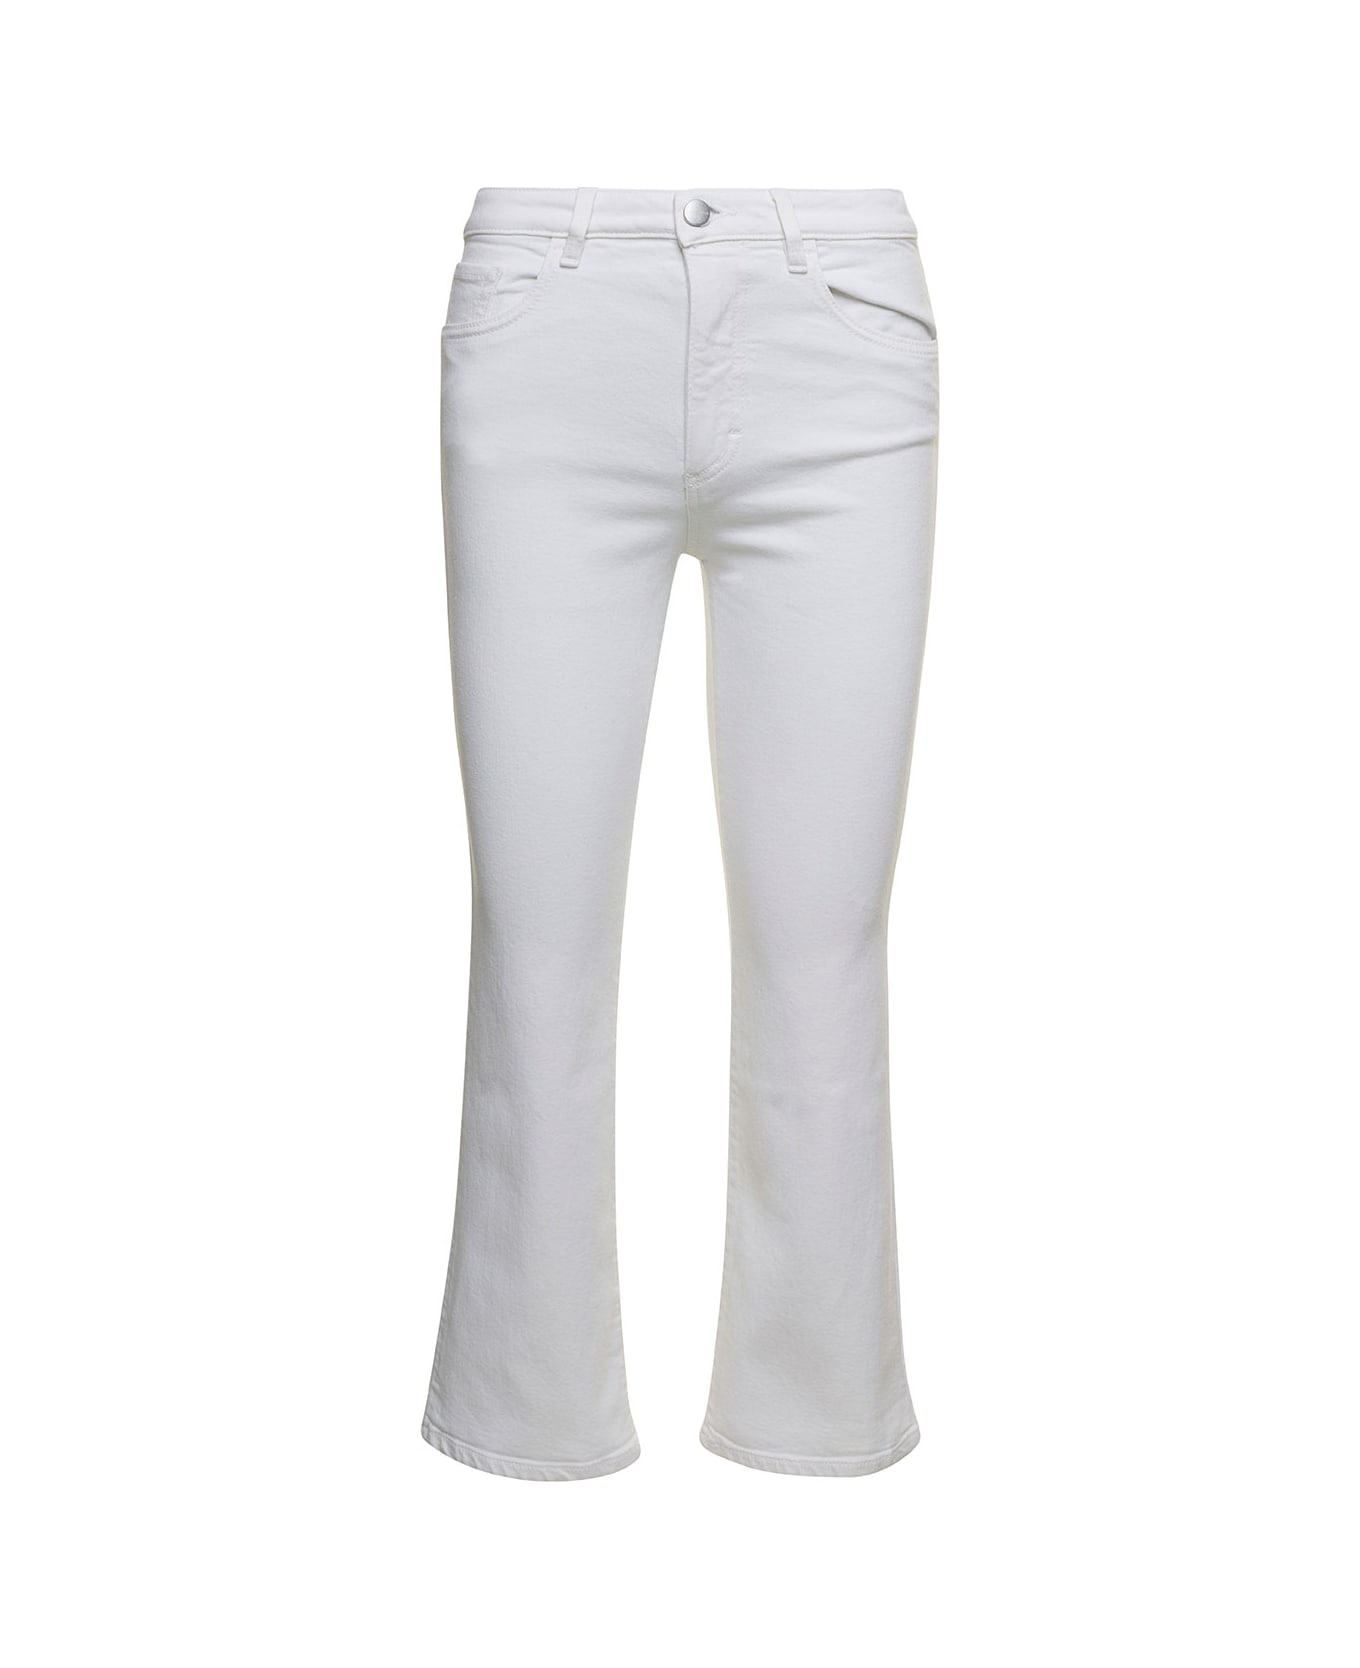 Icon Denim 'pam' White Five-pockets Flared Jeans In Cotton Blend Denim Woman - White ボトムス